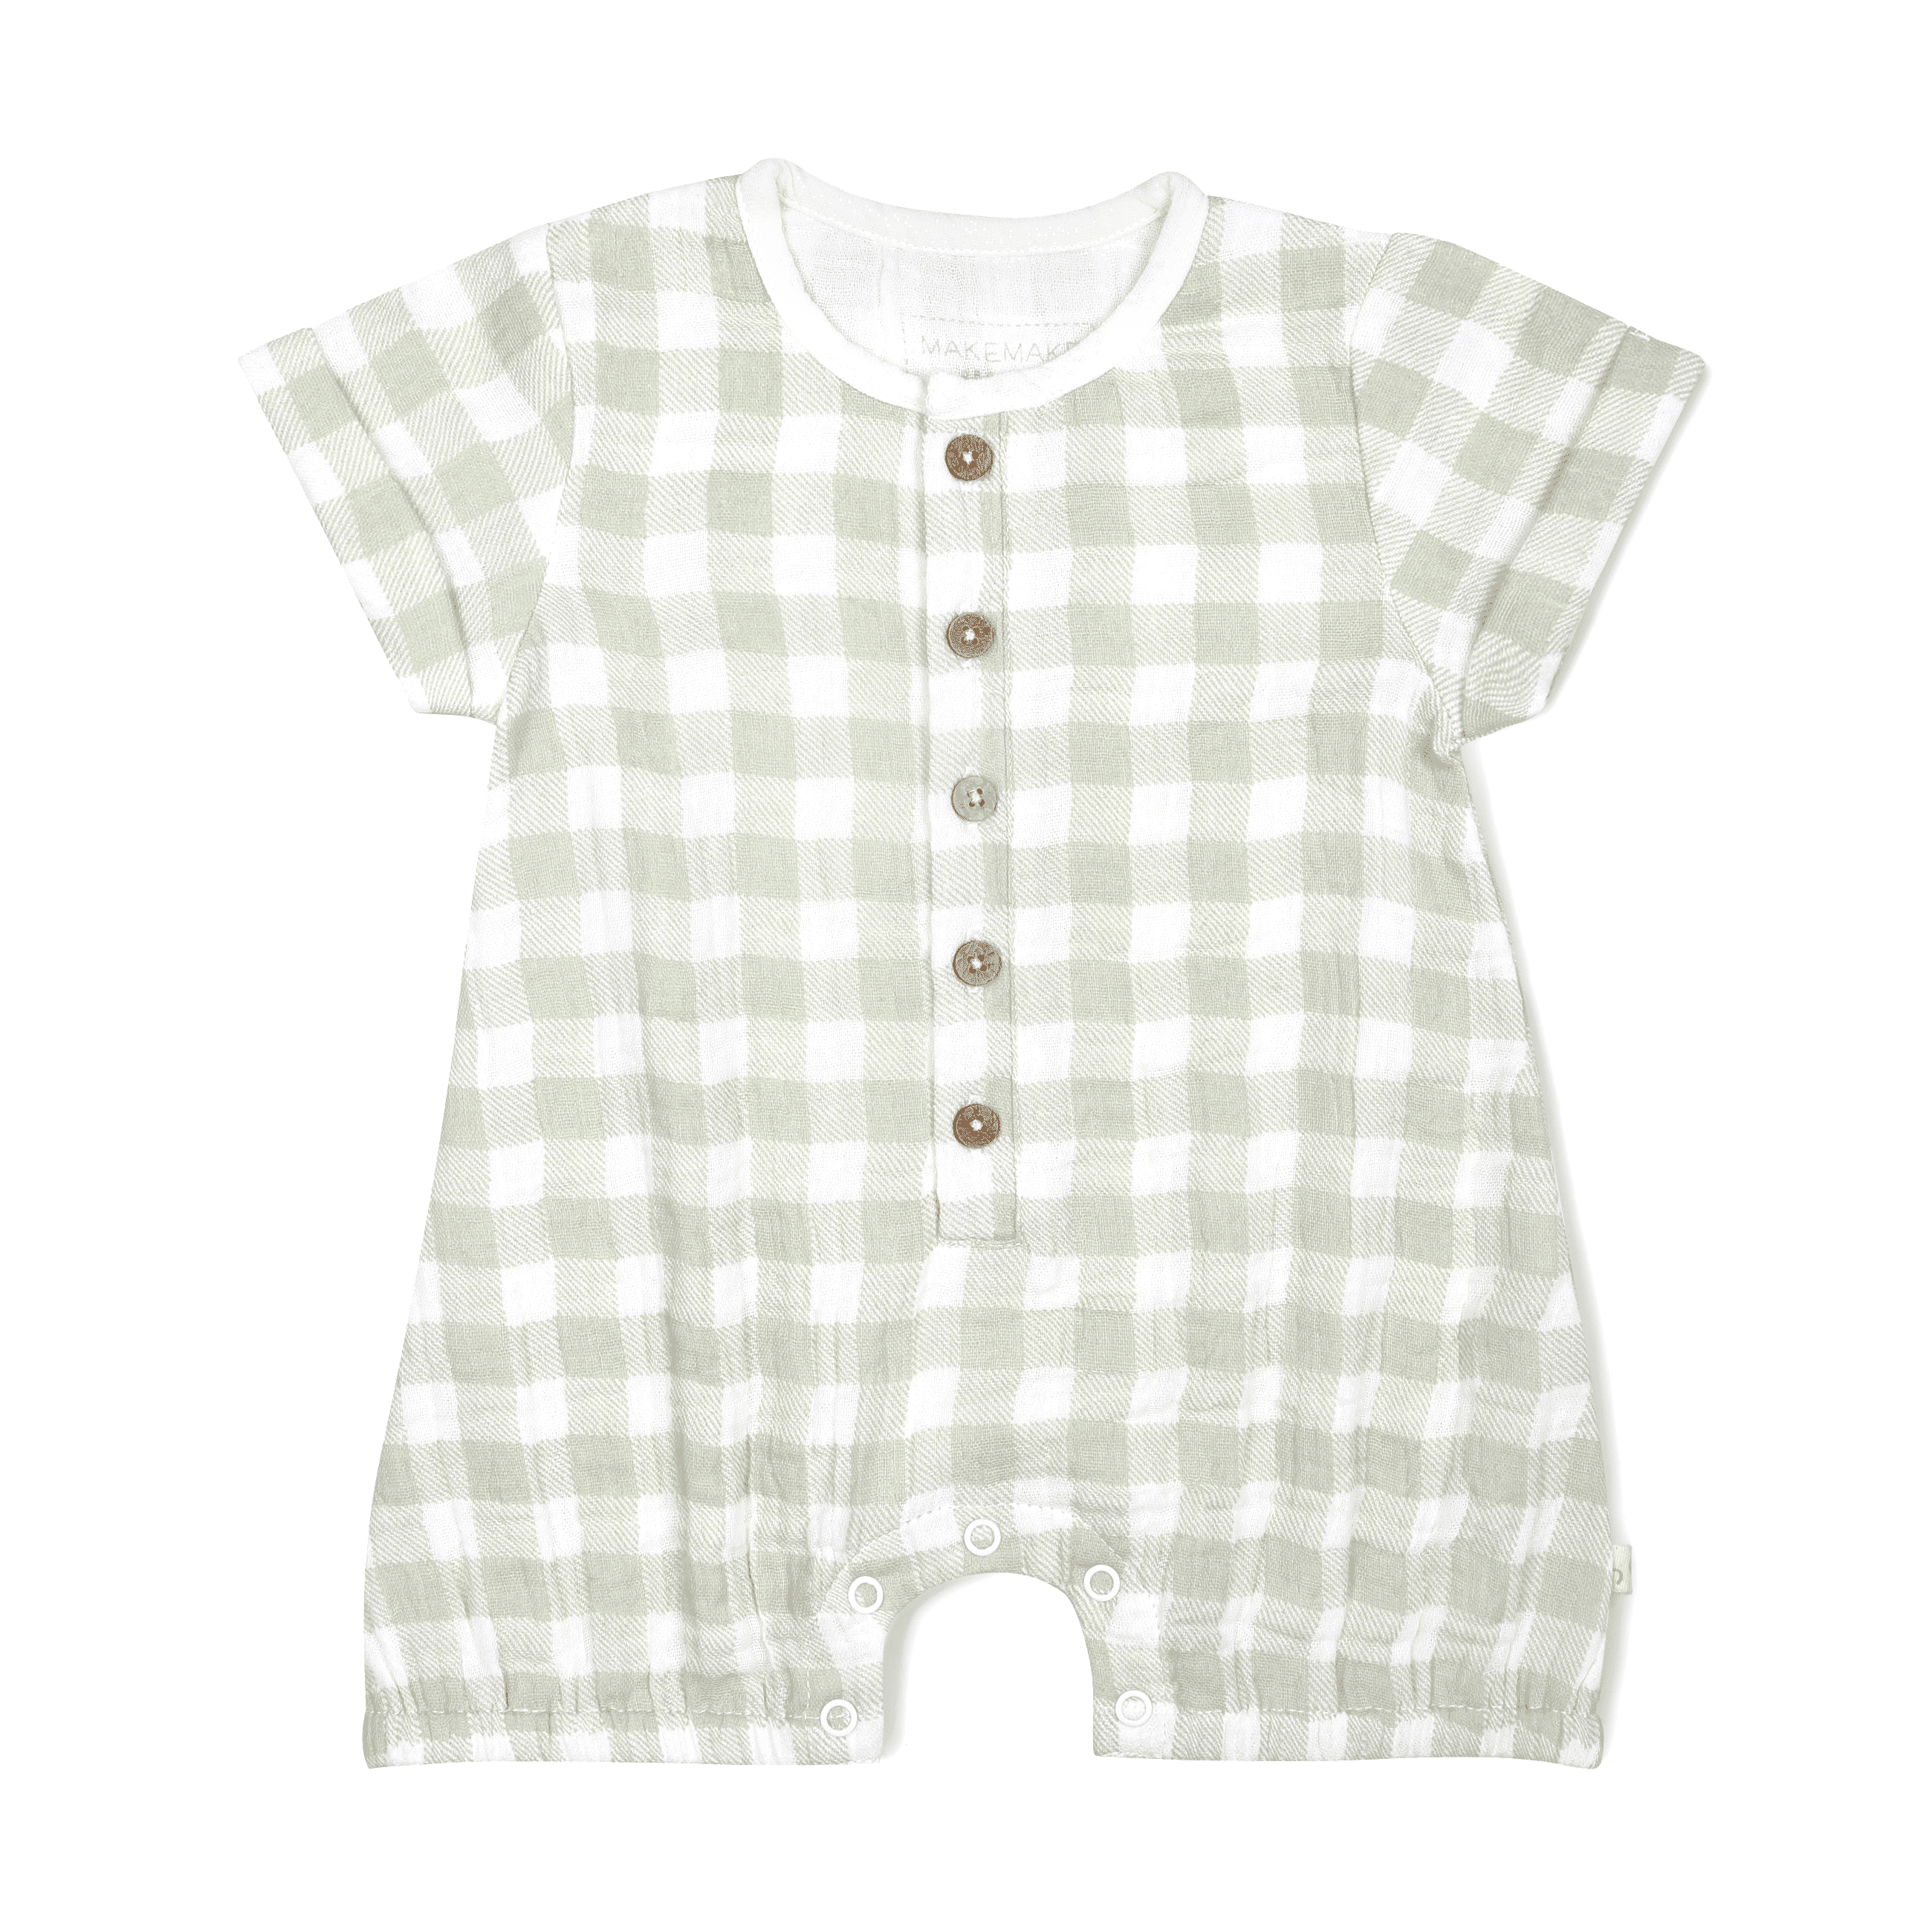 A green and white gingham patterned baby romper with short sleeves and wooden button closures, displayed against a white background. This Organic Muslin Short Bubble Romper - Gingham from Makemake Organics is suitable for both baby girls and toddlers.